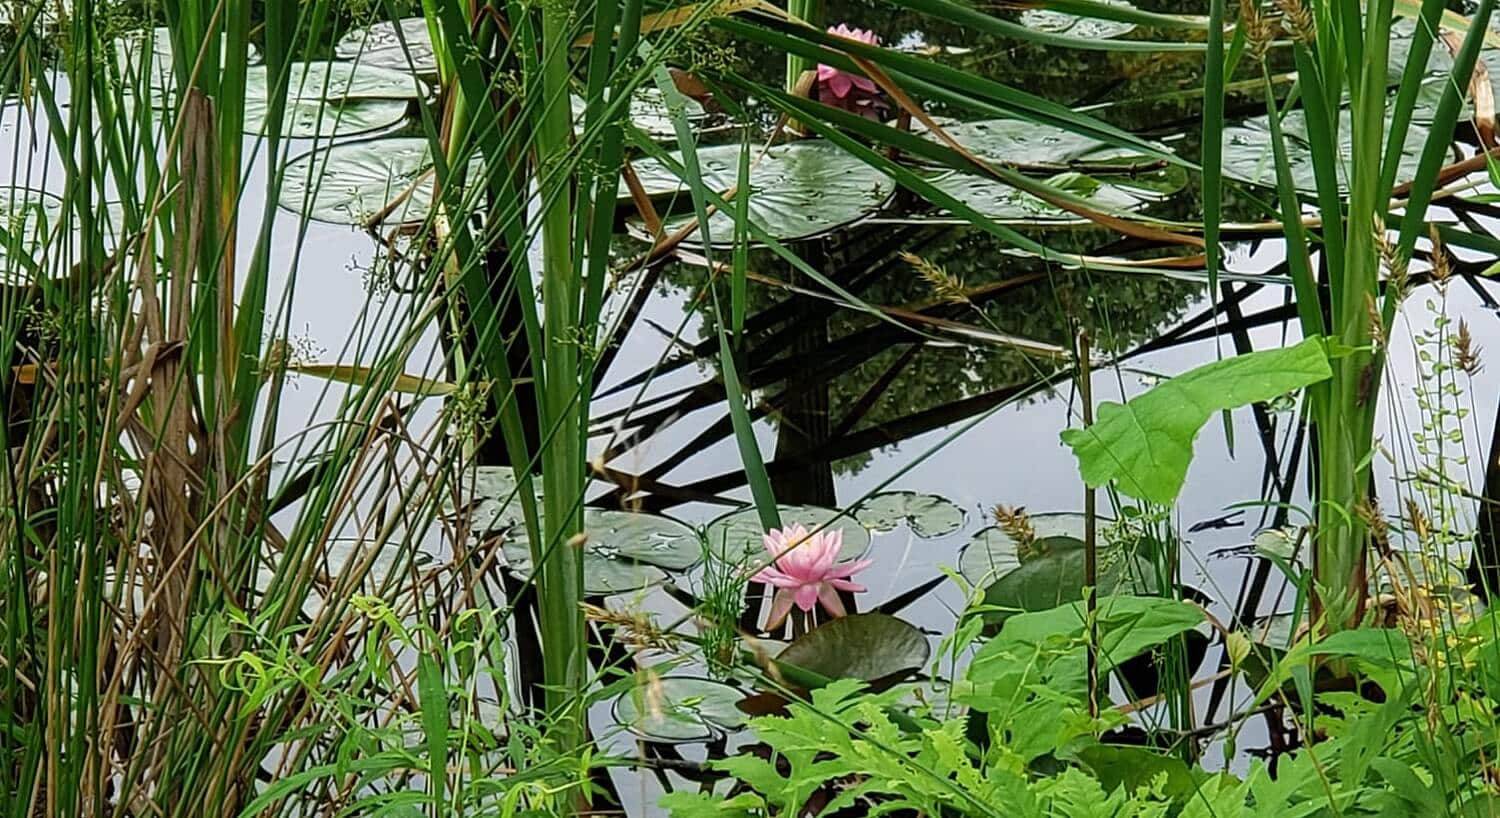 Large green lily pads with pink flowers in a pond with tall grasses